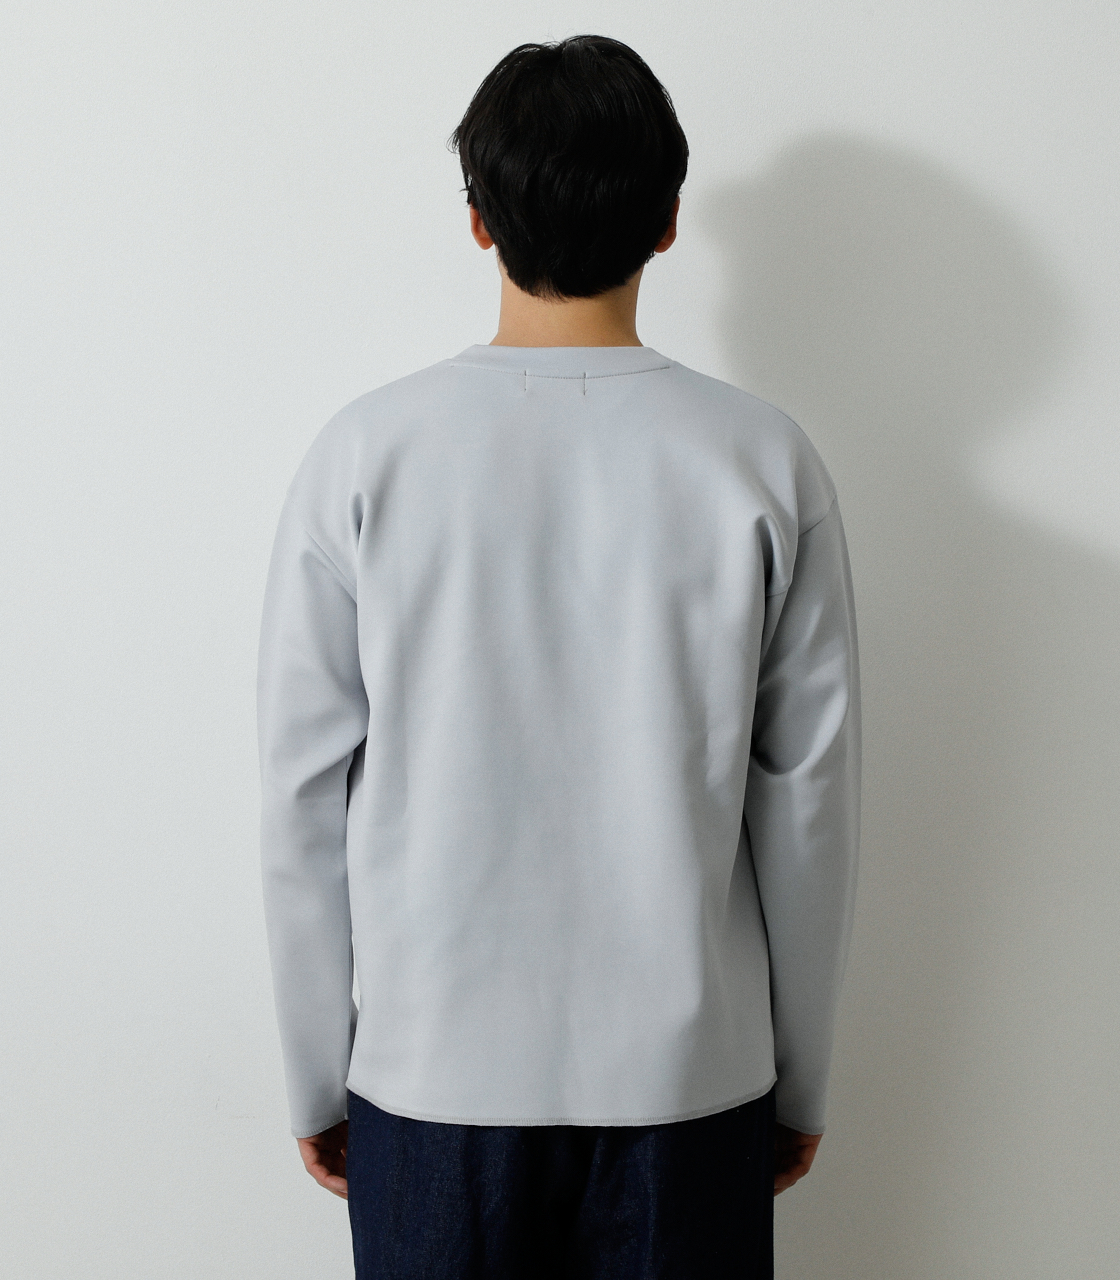 CARDBOARD NEEDLE PULLING TOPS/カードボードニードルプリングトップス 詳細画像 L/GRY 7